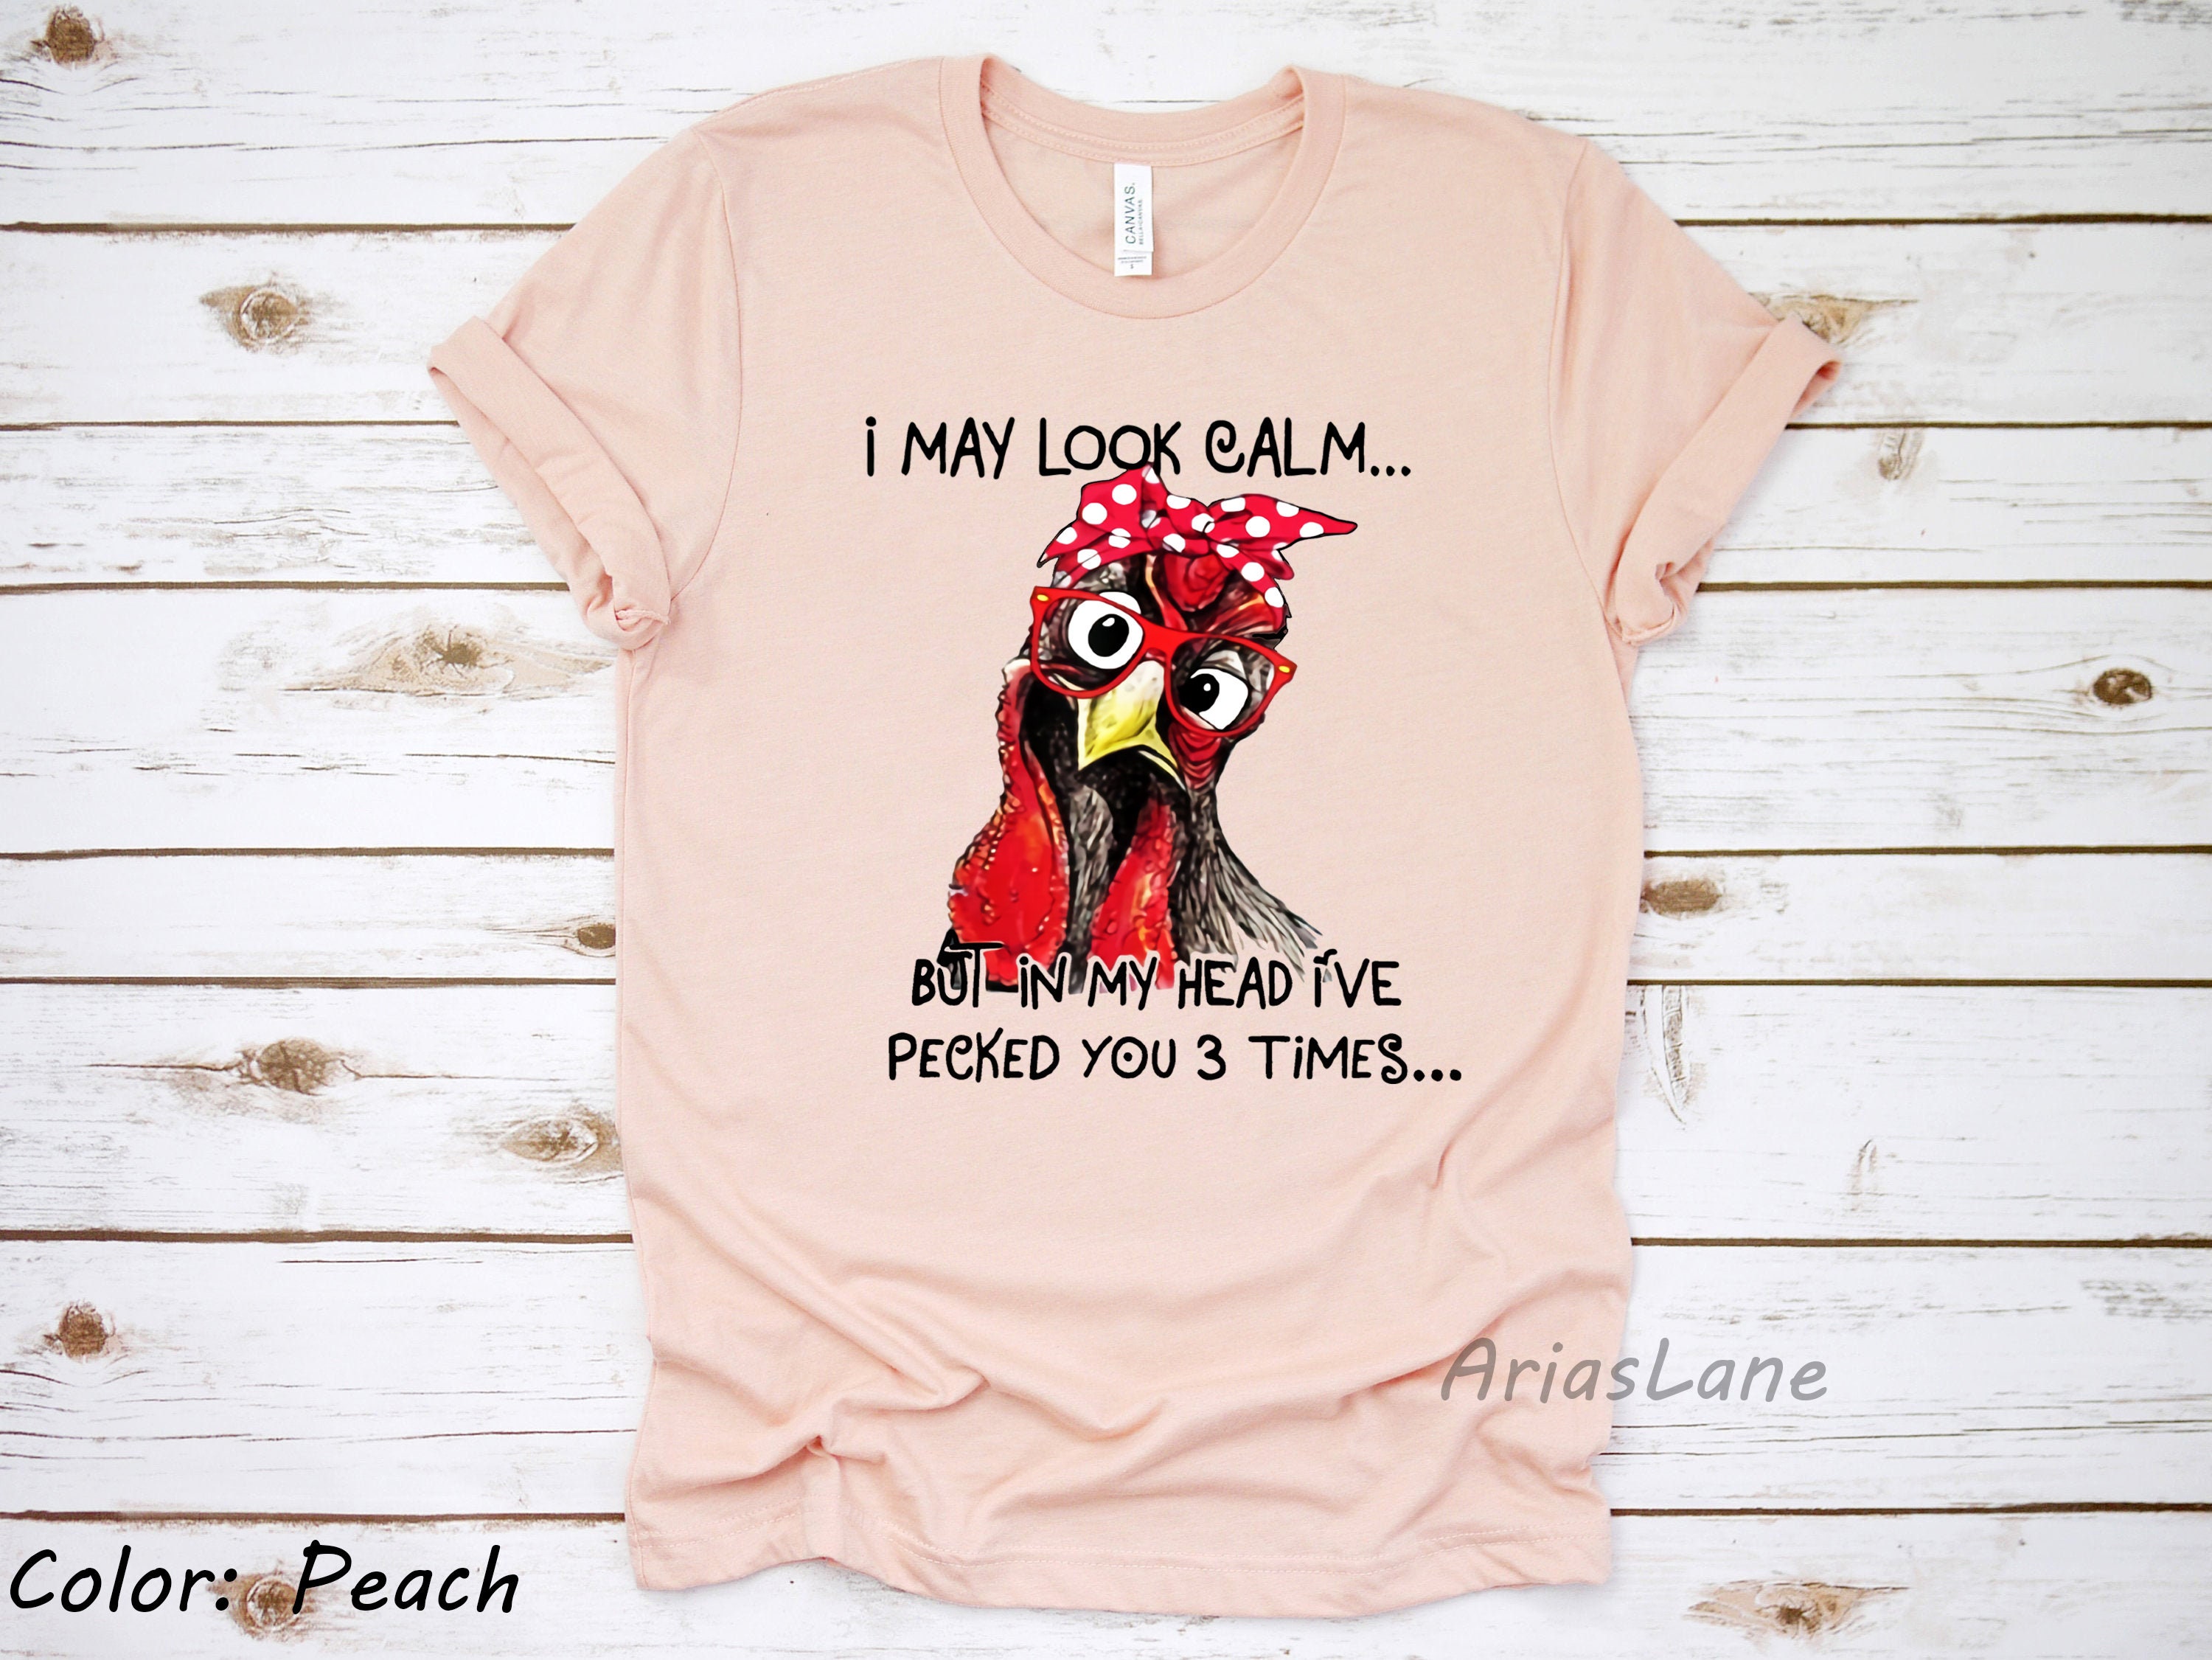 I May Look Calm but in My Head I've Pecked You 3 Times | Etsy